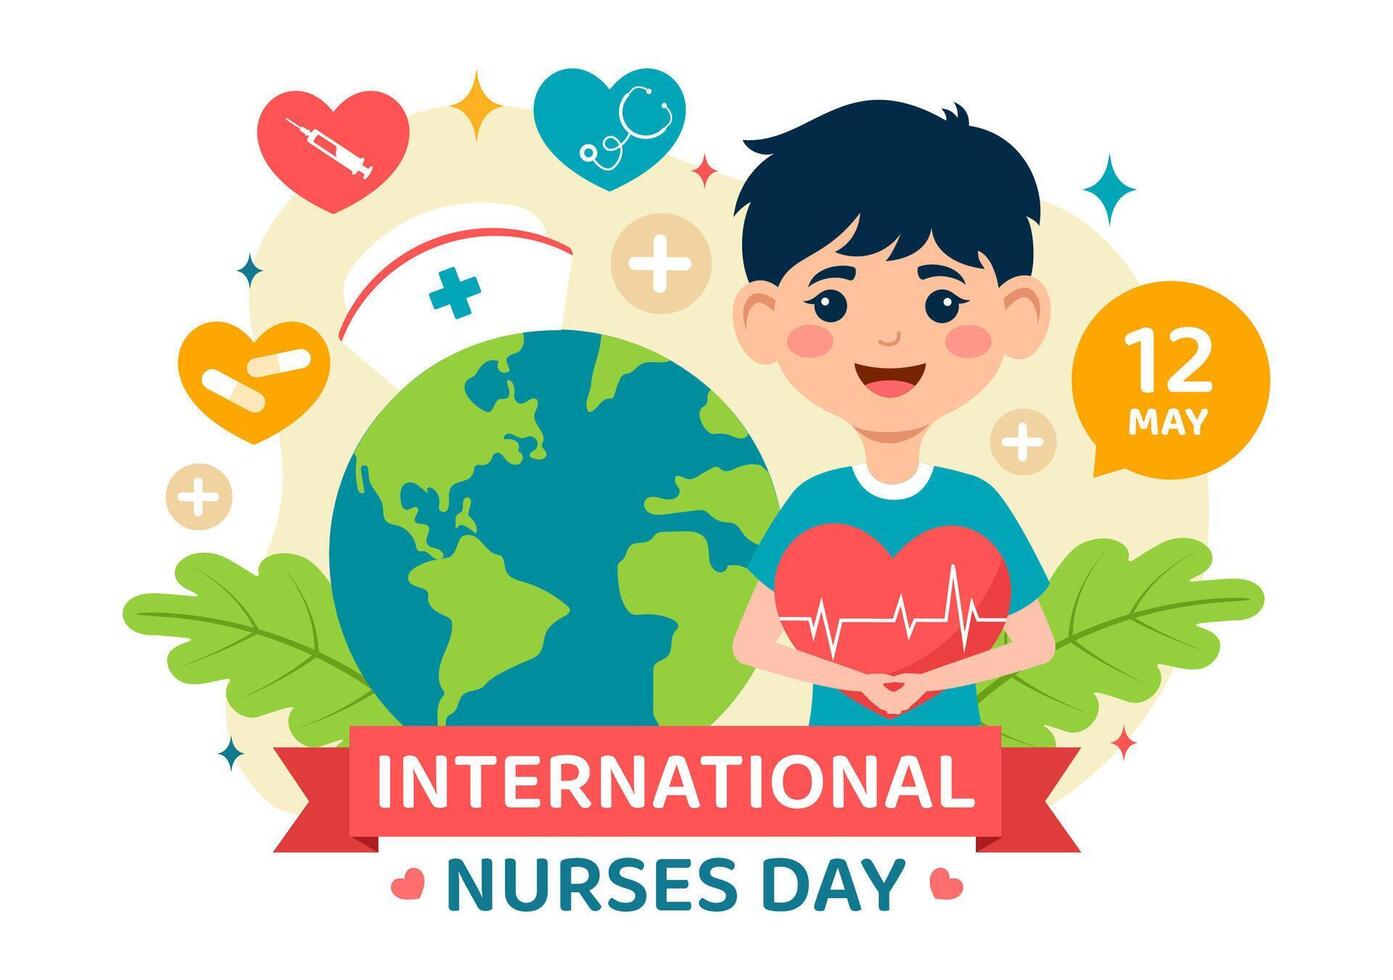 International Nurses Day Vector Illustration on May 12 for Contributions that Nurse Make to Society in Healthcare Flat Kids Cartoon Background